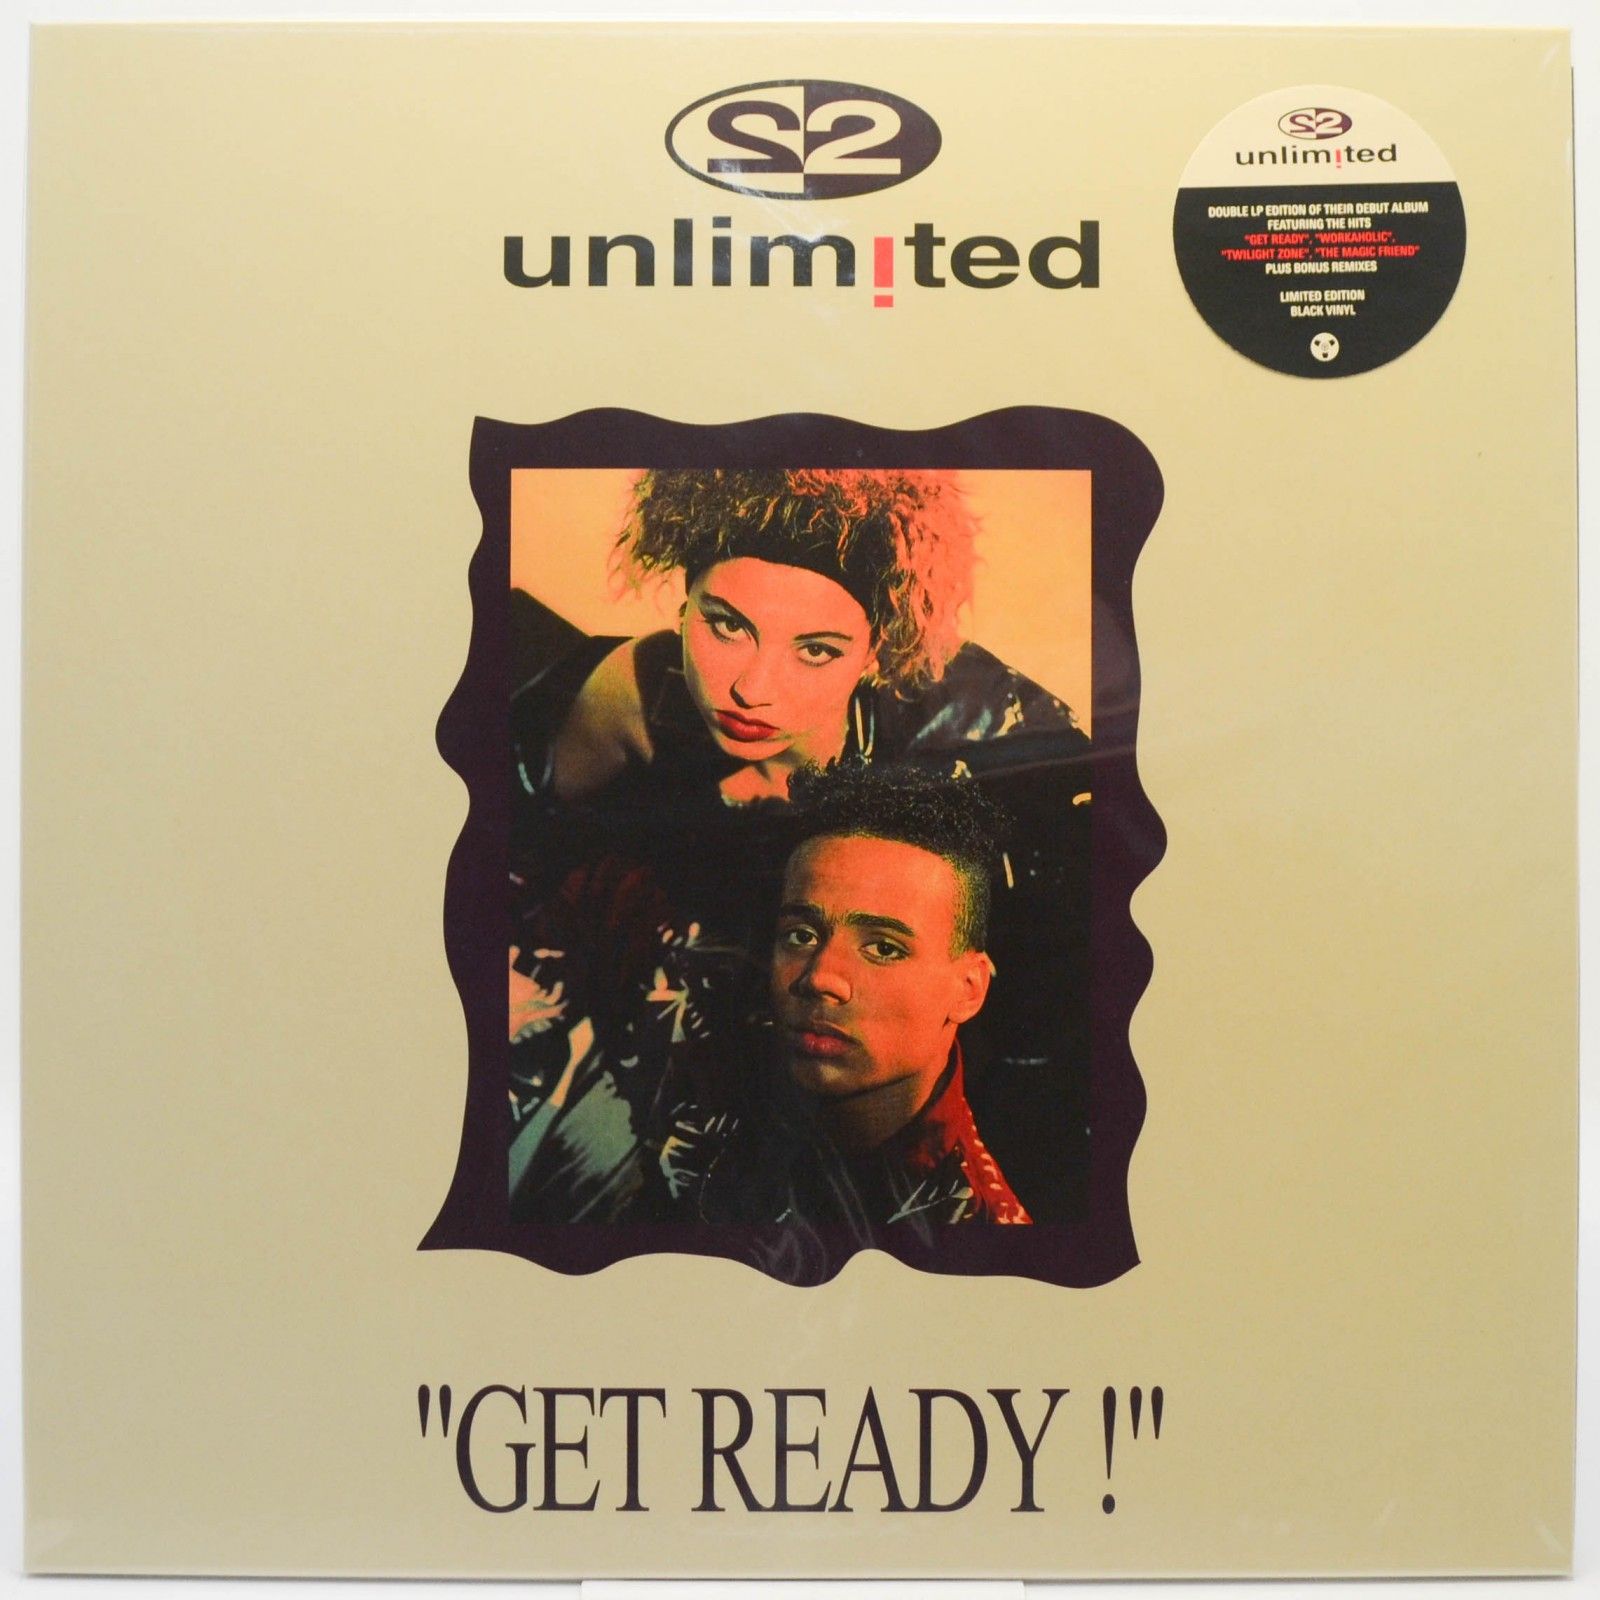 2 Unlimited — Get Ready ! (2LP), 1992